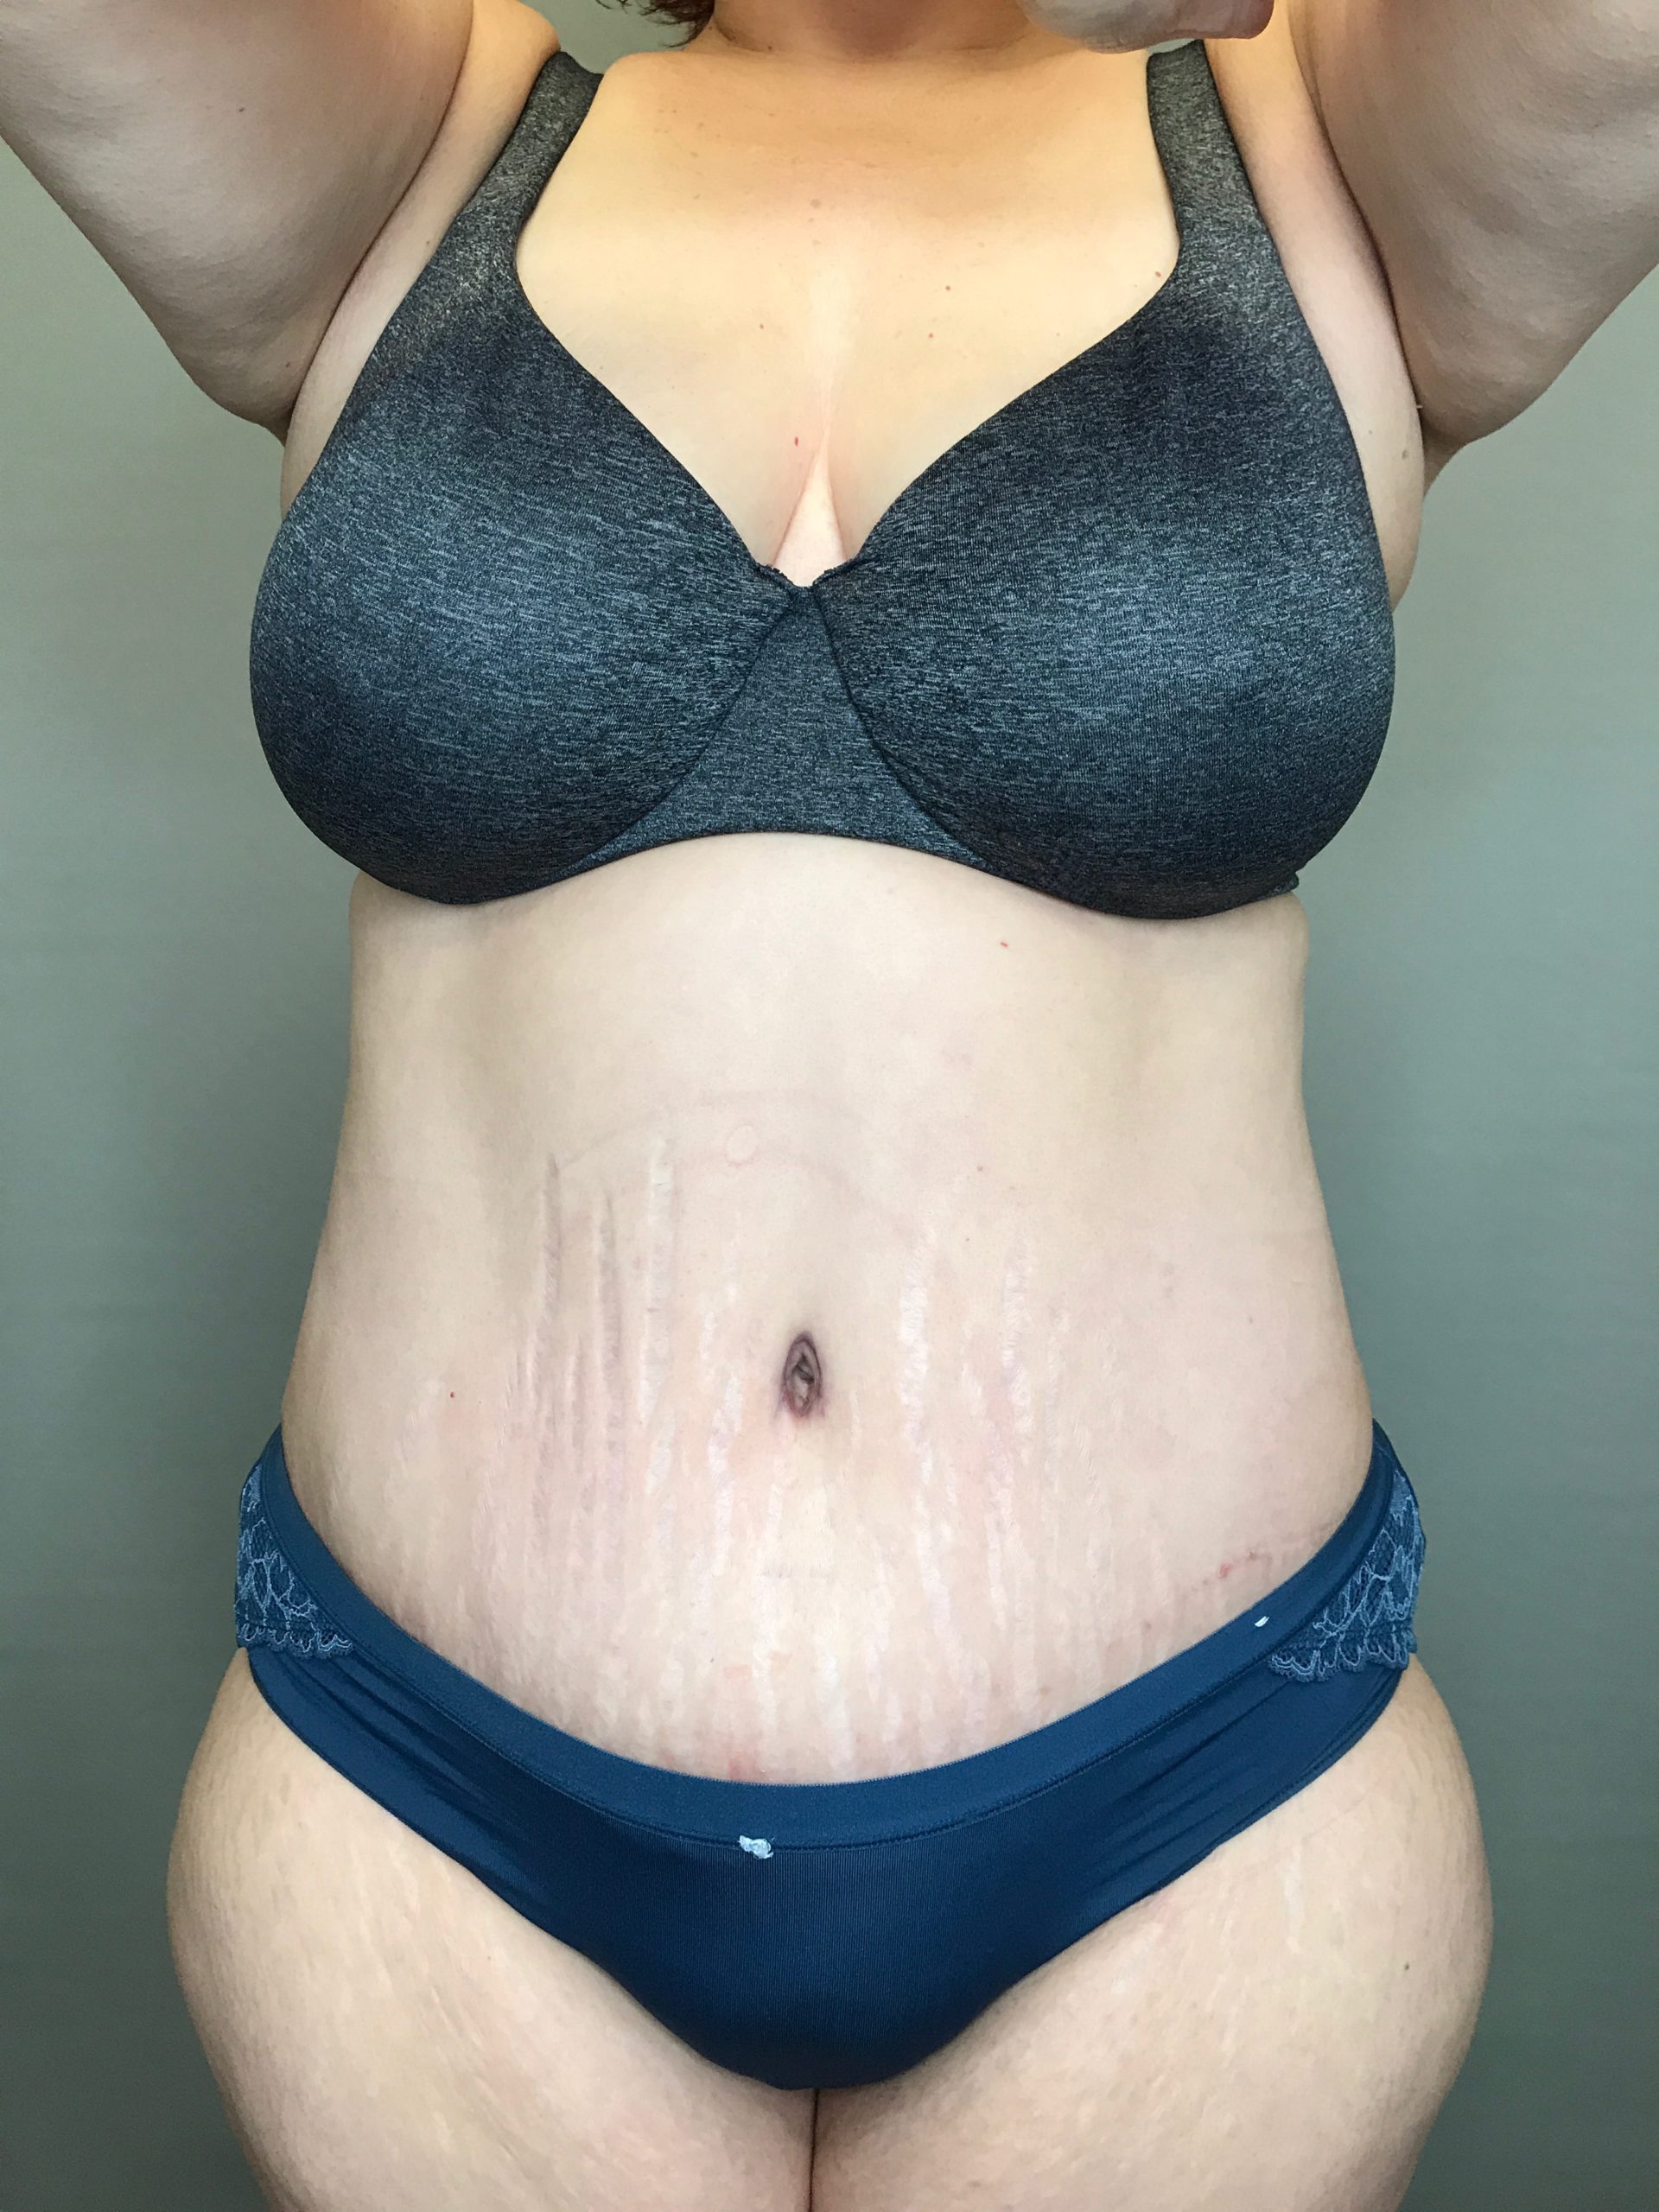 Tummy Tuck Before After Photos Lift Plastic Surgery